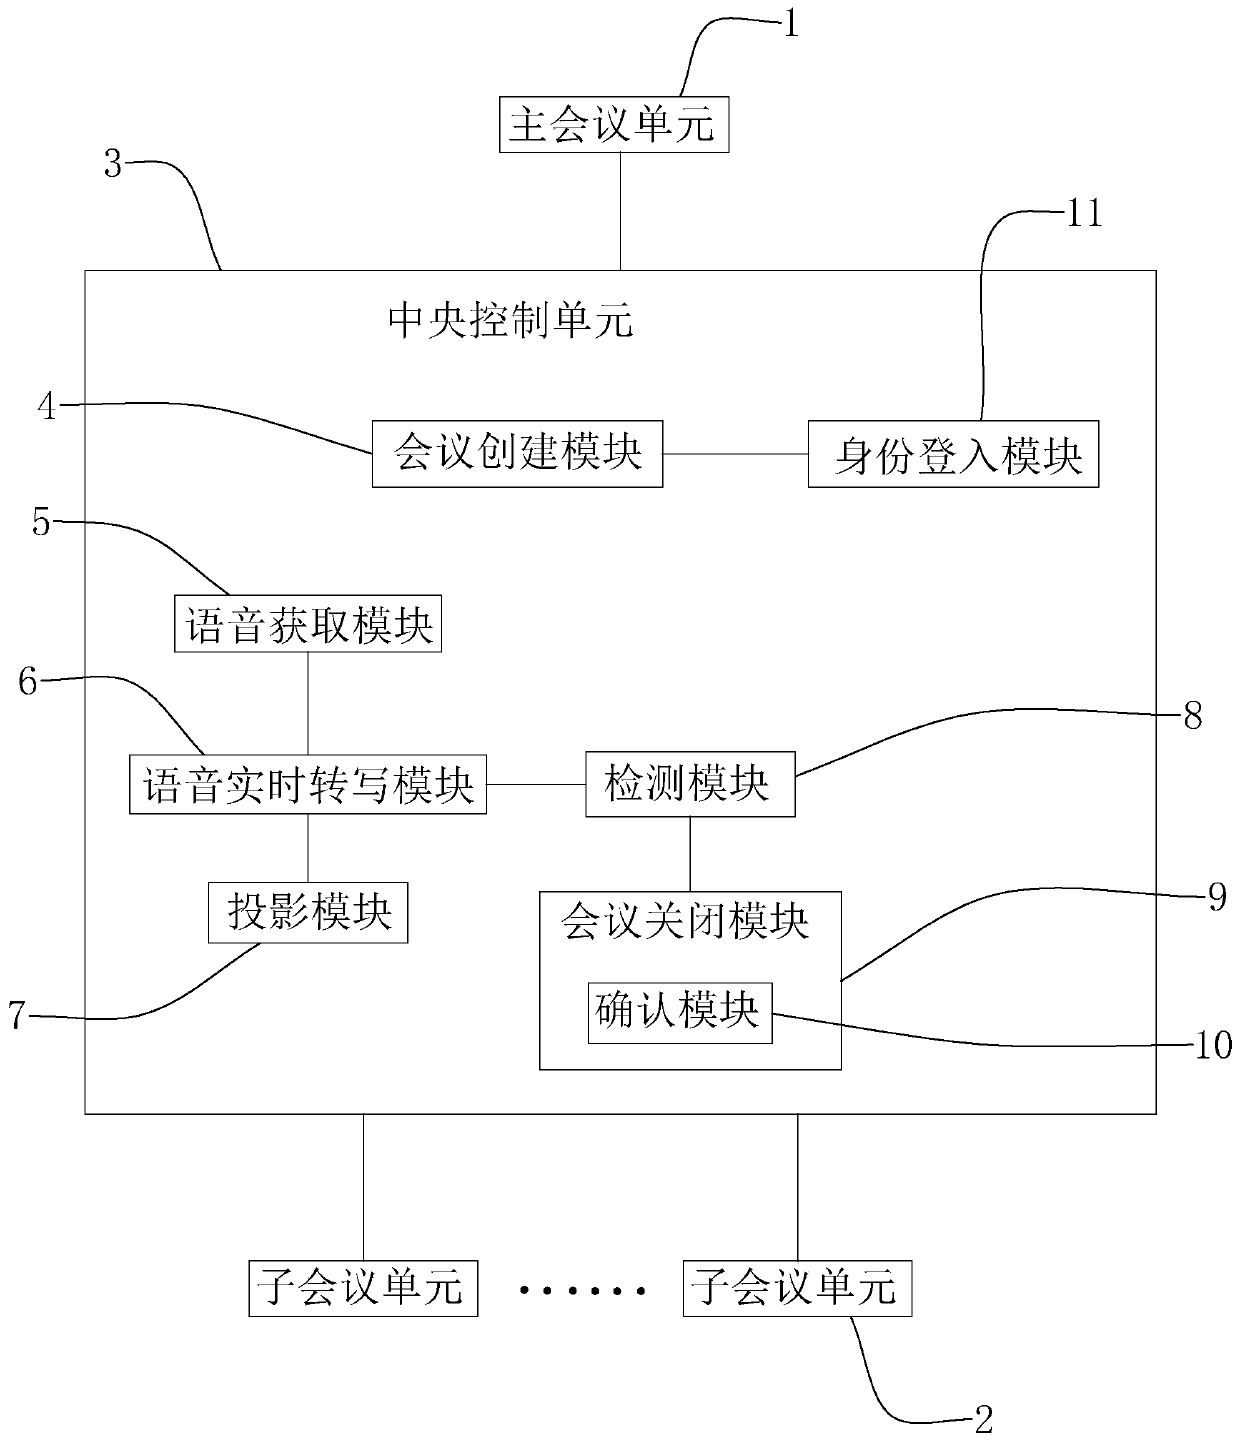 Display system based on voice real-time transliteration